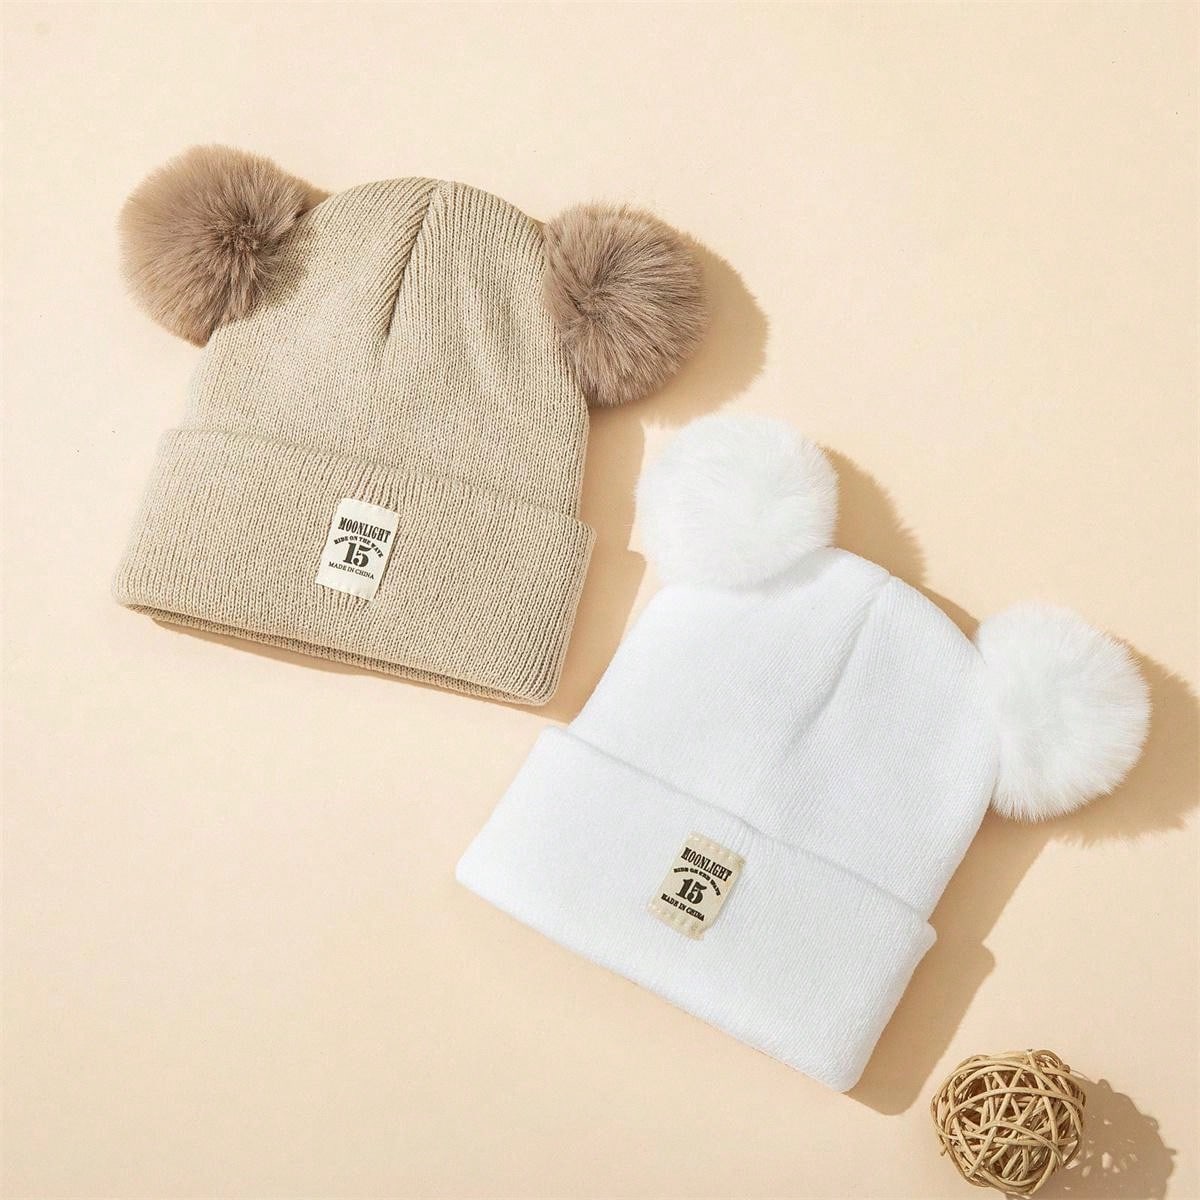 2pcs Double Ball Cart Label Children's Knitted Hat Combination Suitable For Winter Warm Keeping Winter Hat For Baby twins